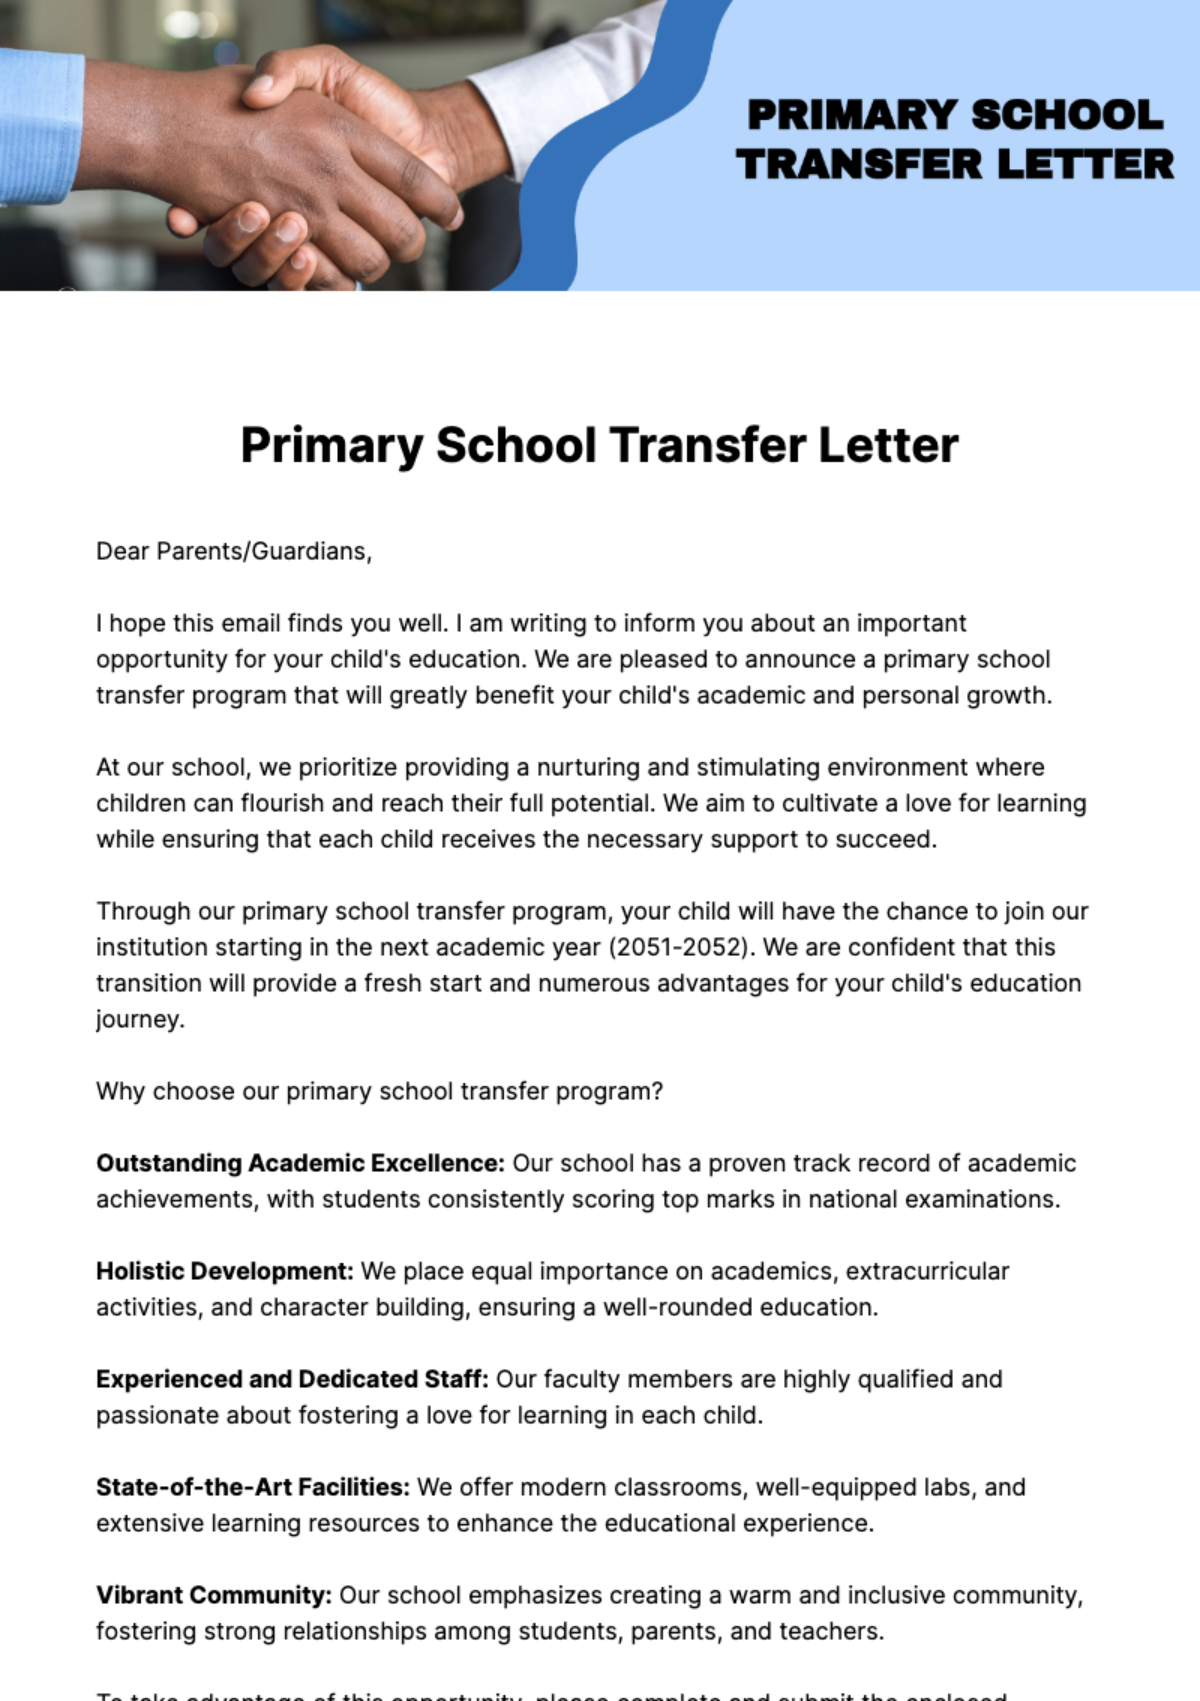 Free Primary School Transfer Letter Template